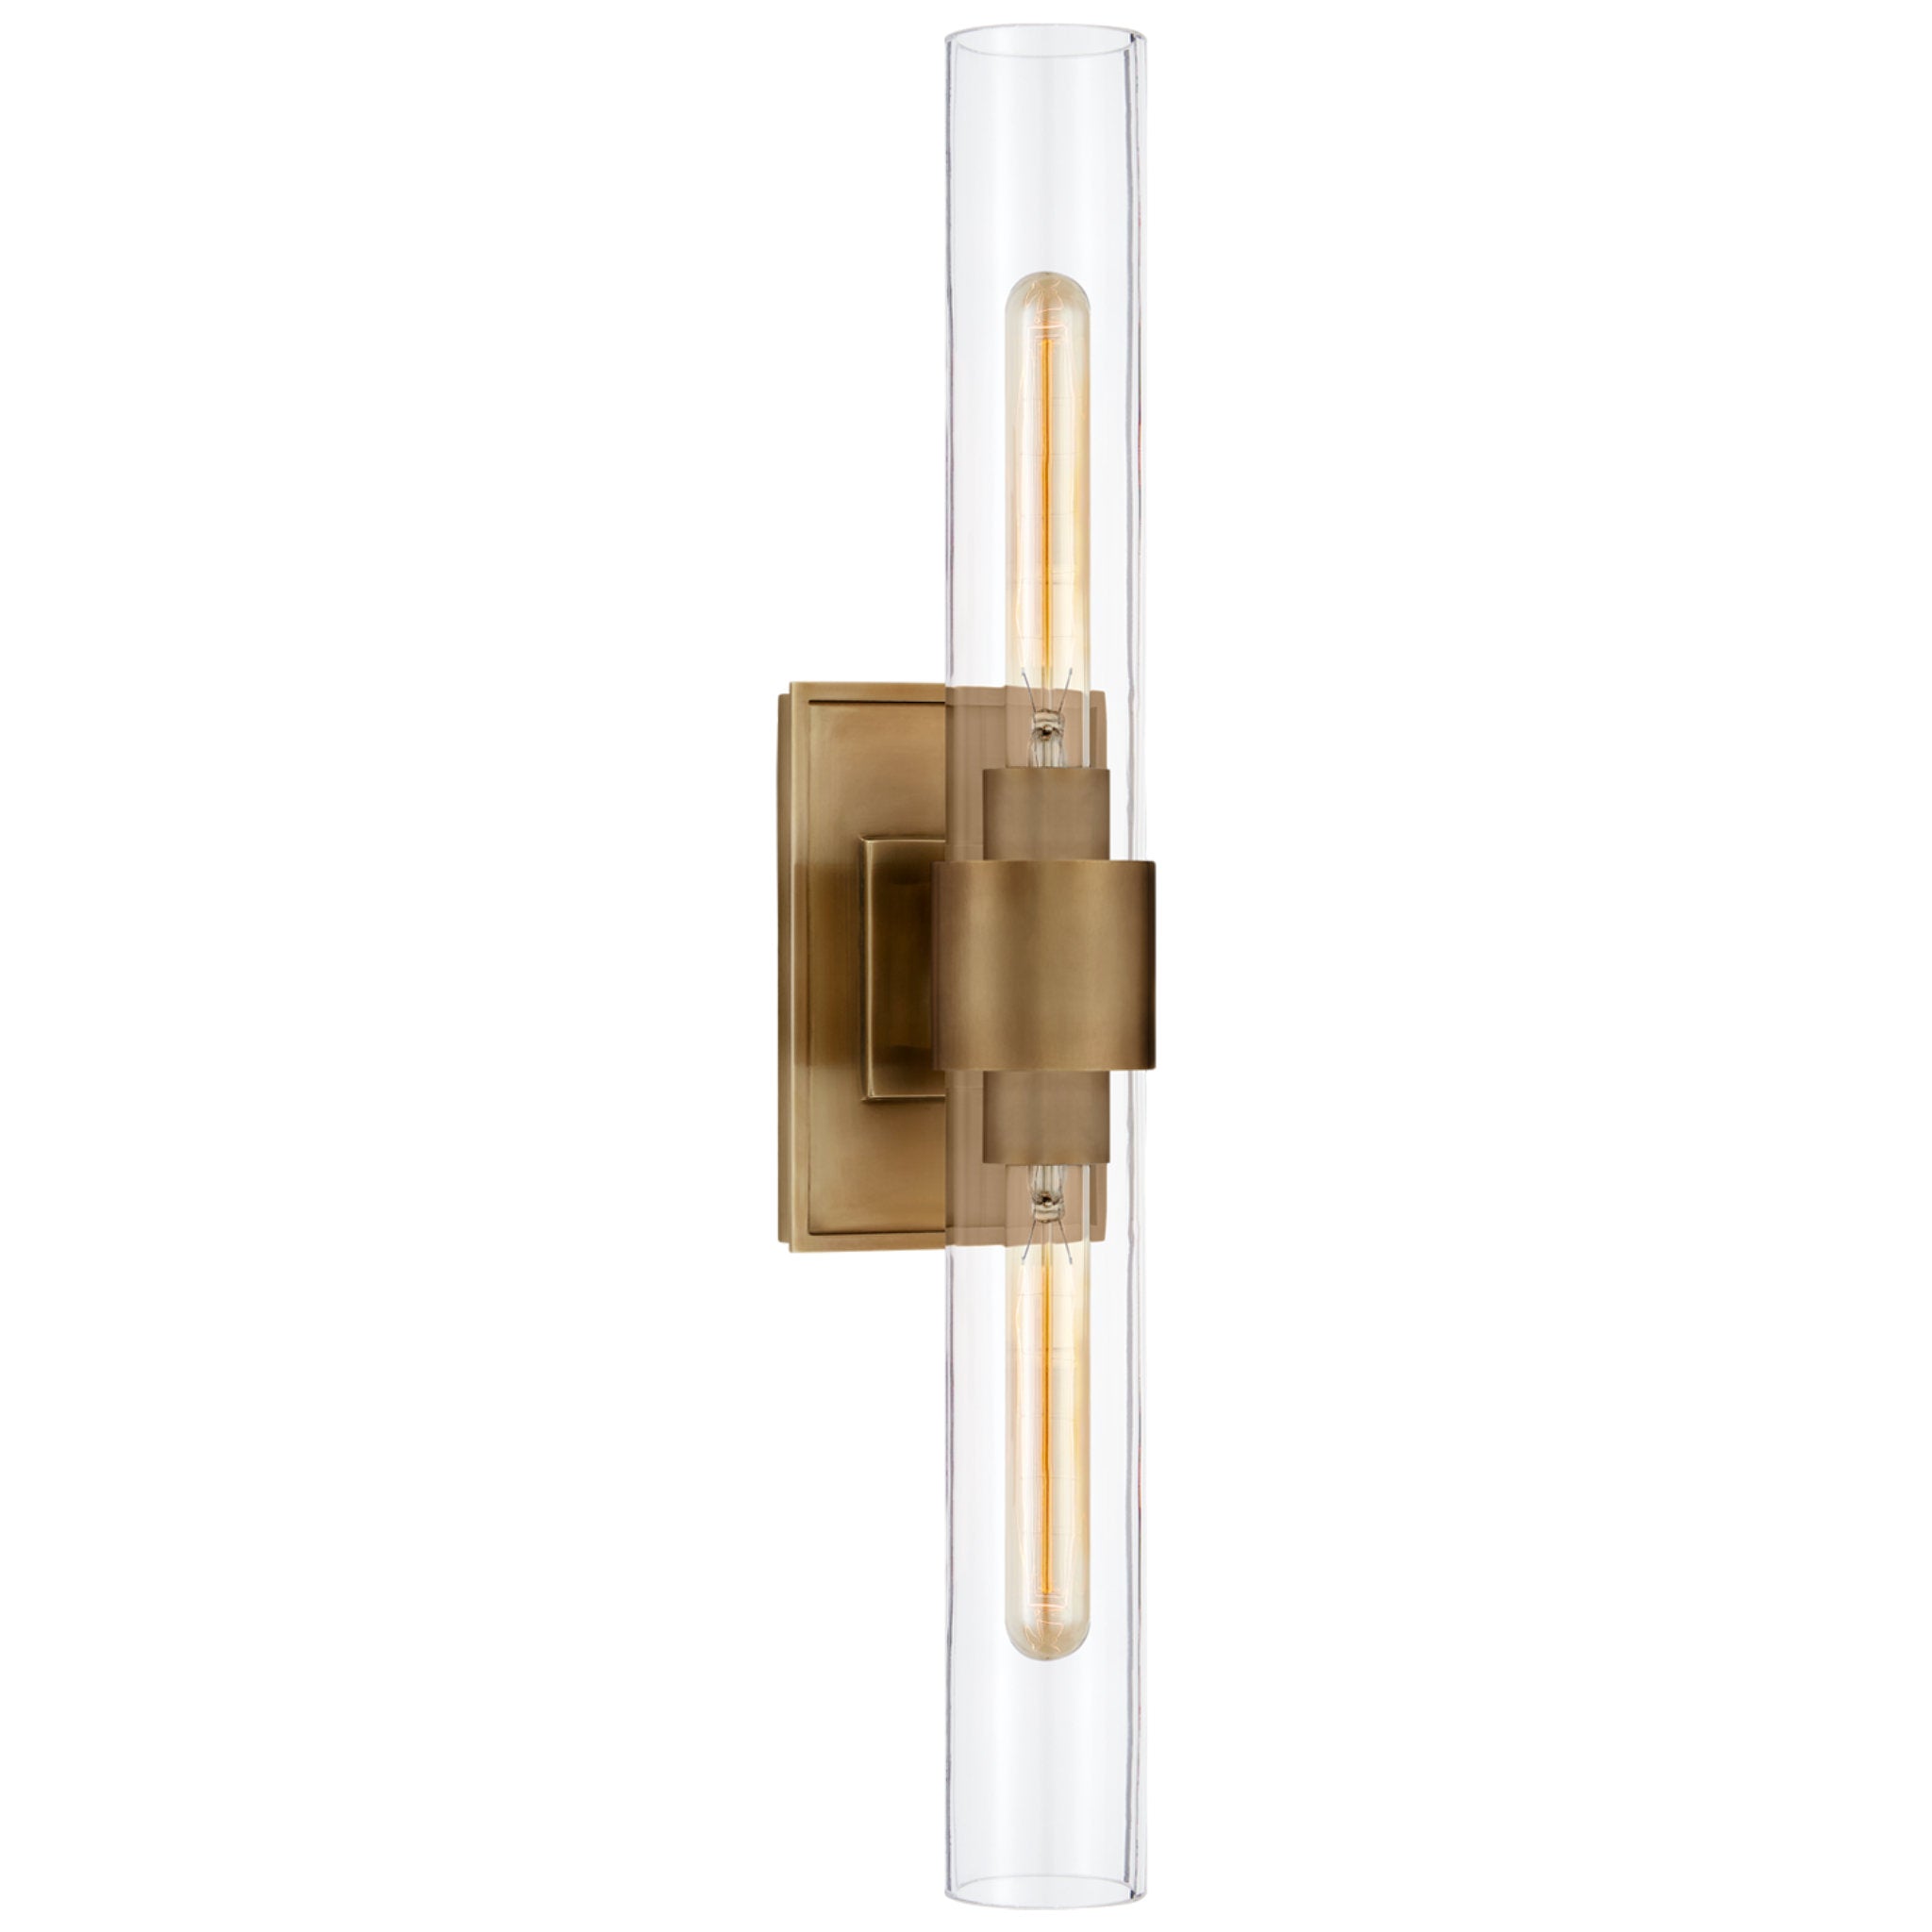 Ian K. Fowler Presidio Petite Double Sconce in Hand-Rubbed Antique Brass with Clear Glass